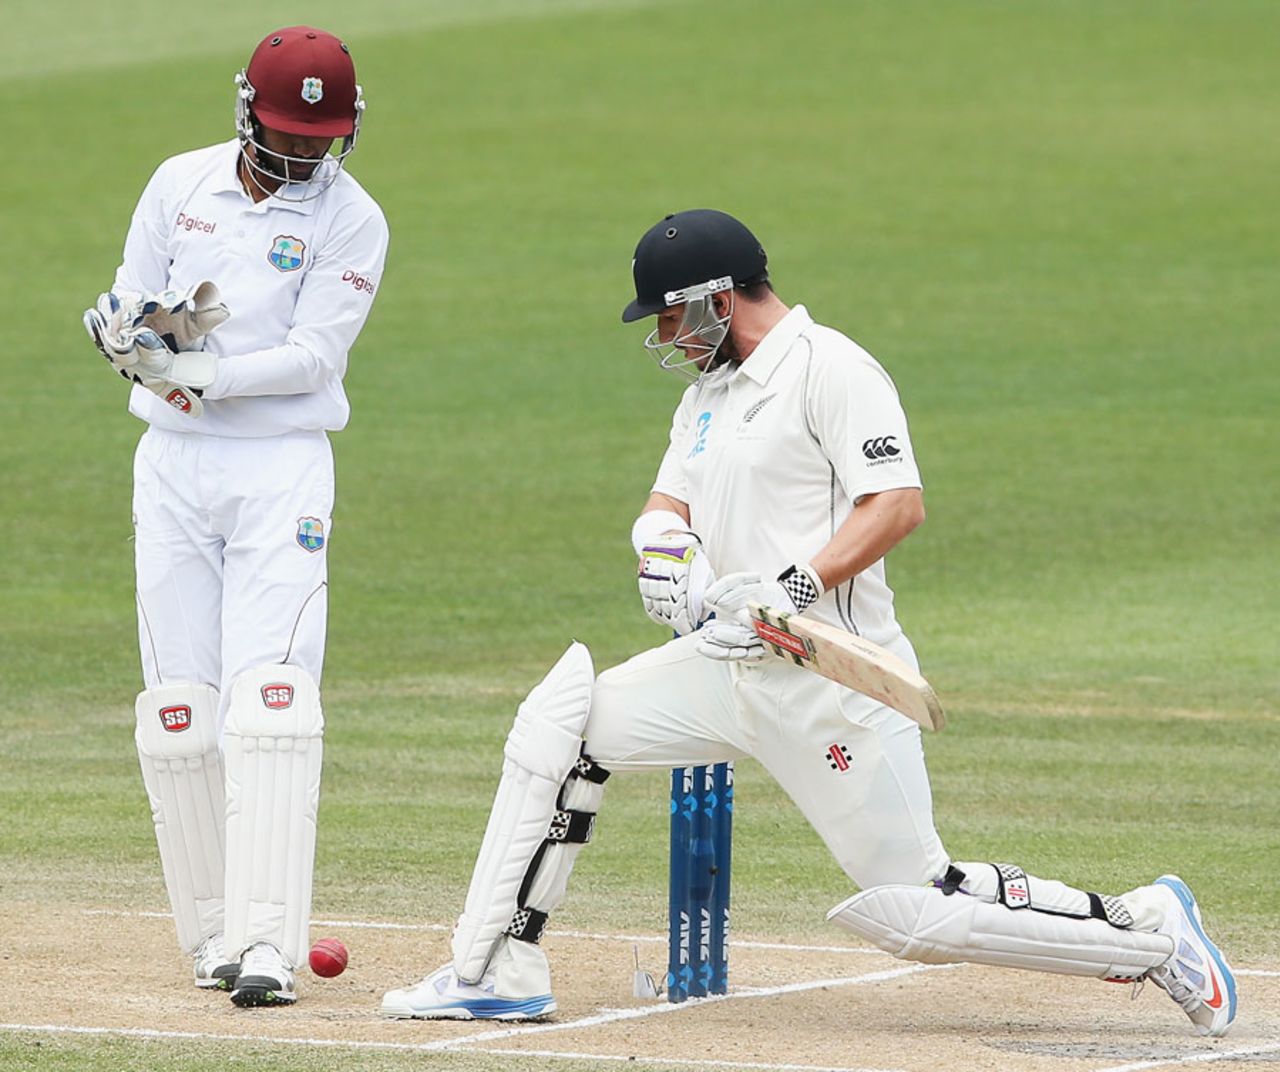 Hamish Rutherford kicks away a ball from his stumps, New Zealand v West Indies, 3rd Test, Hamilton, 4th day, December 22, 2013